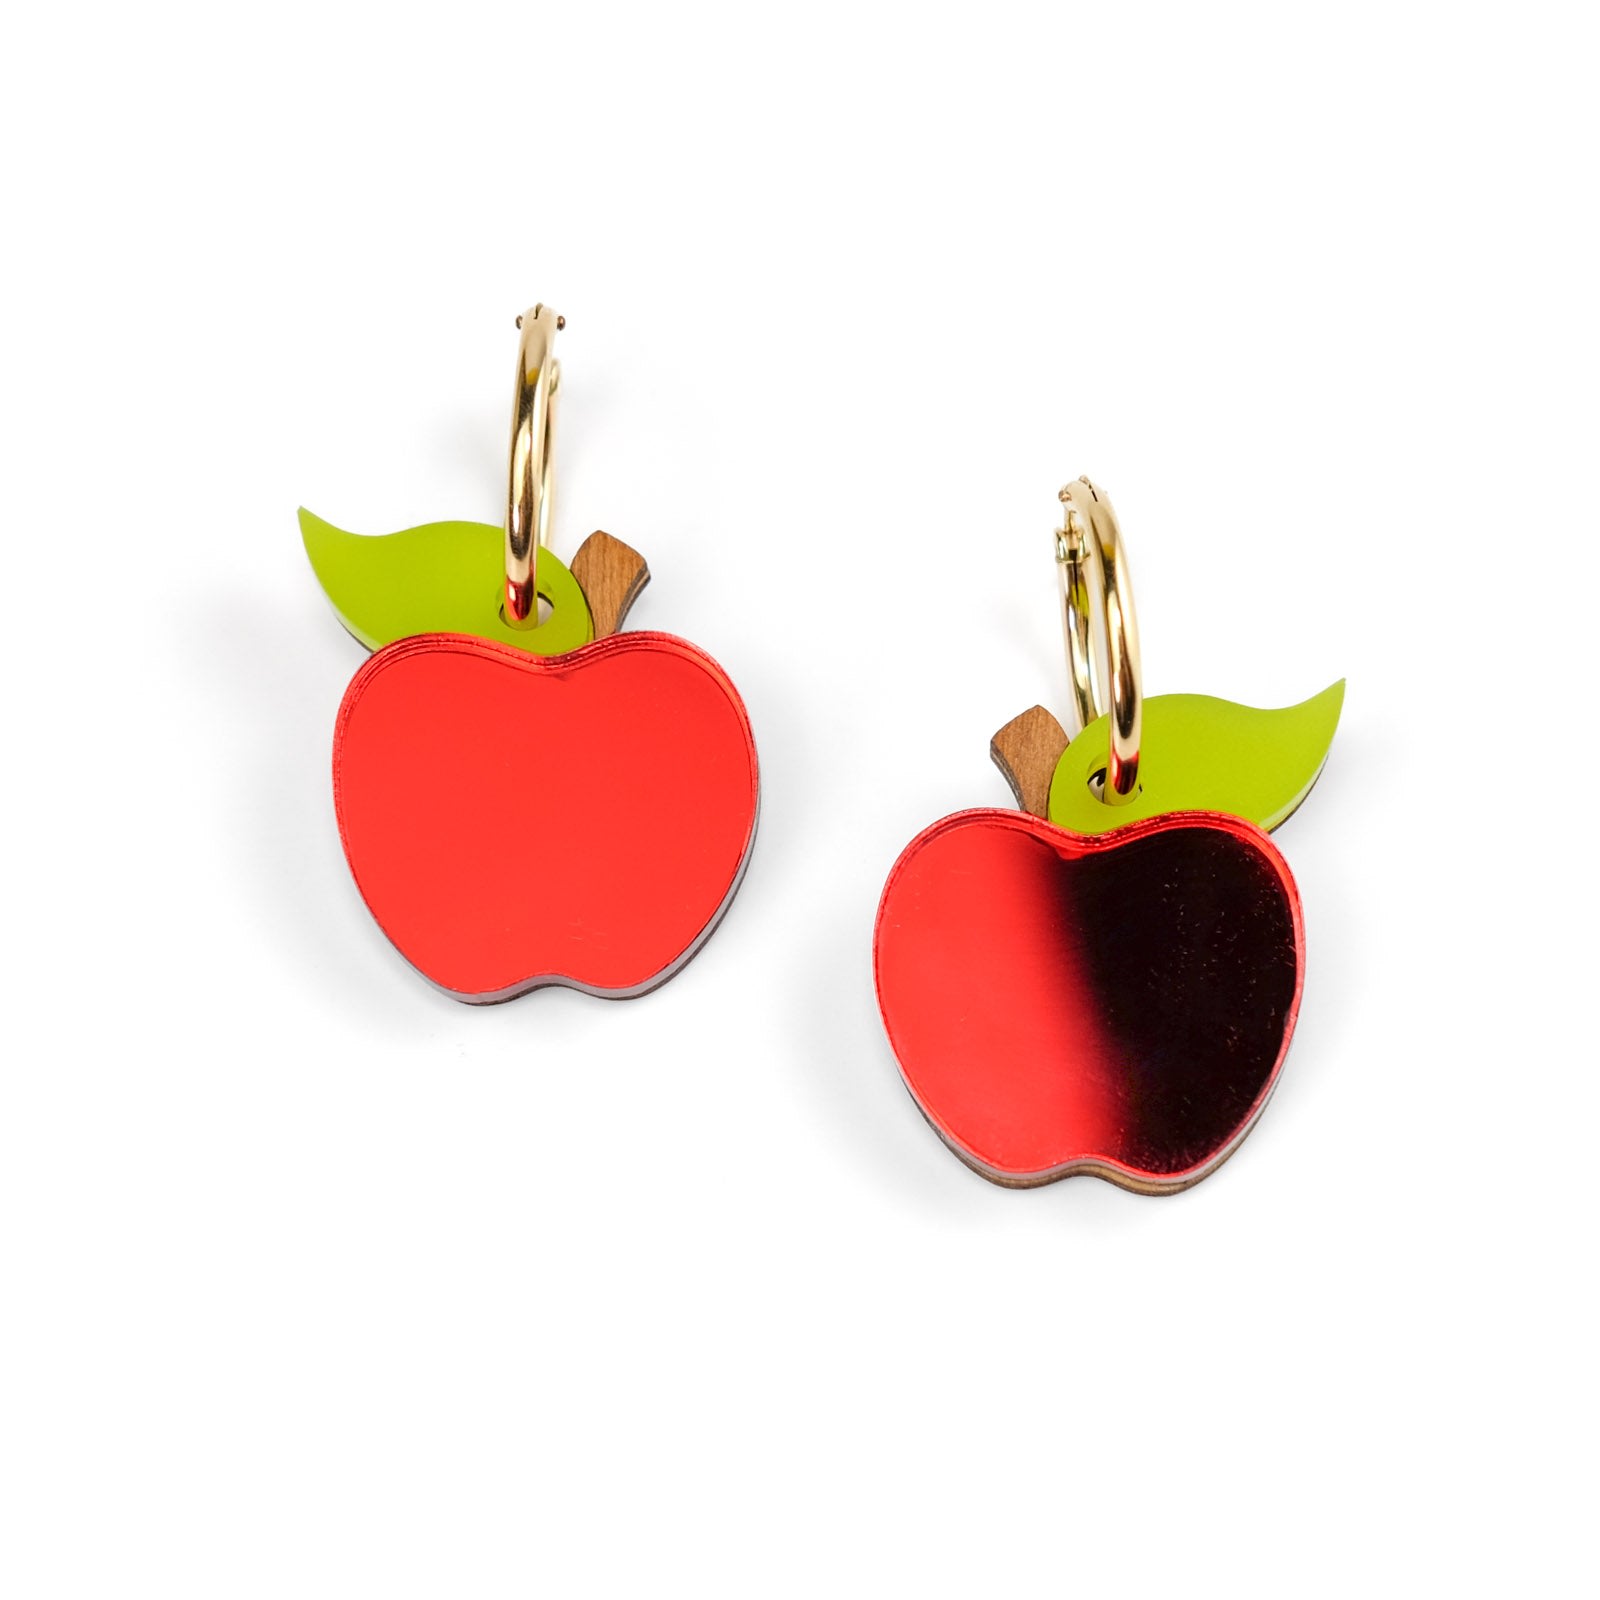 By Chavelli Women's Gold / Red Apple Earrings